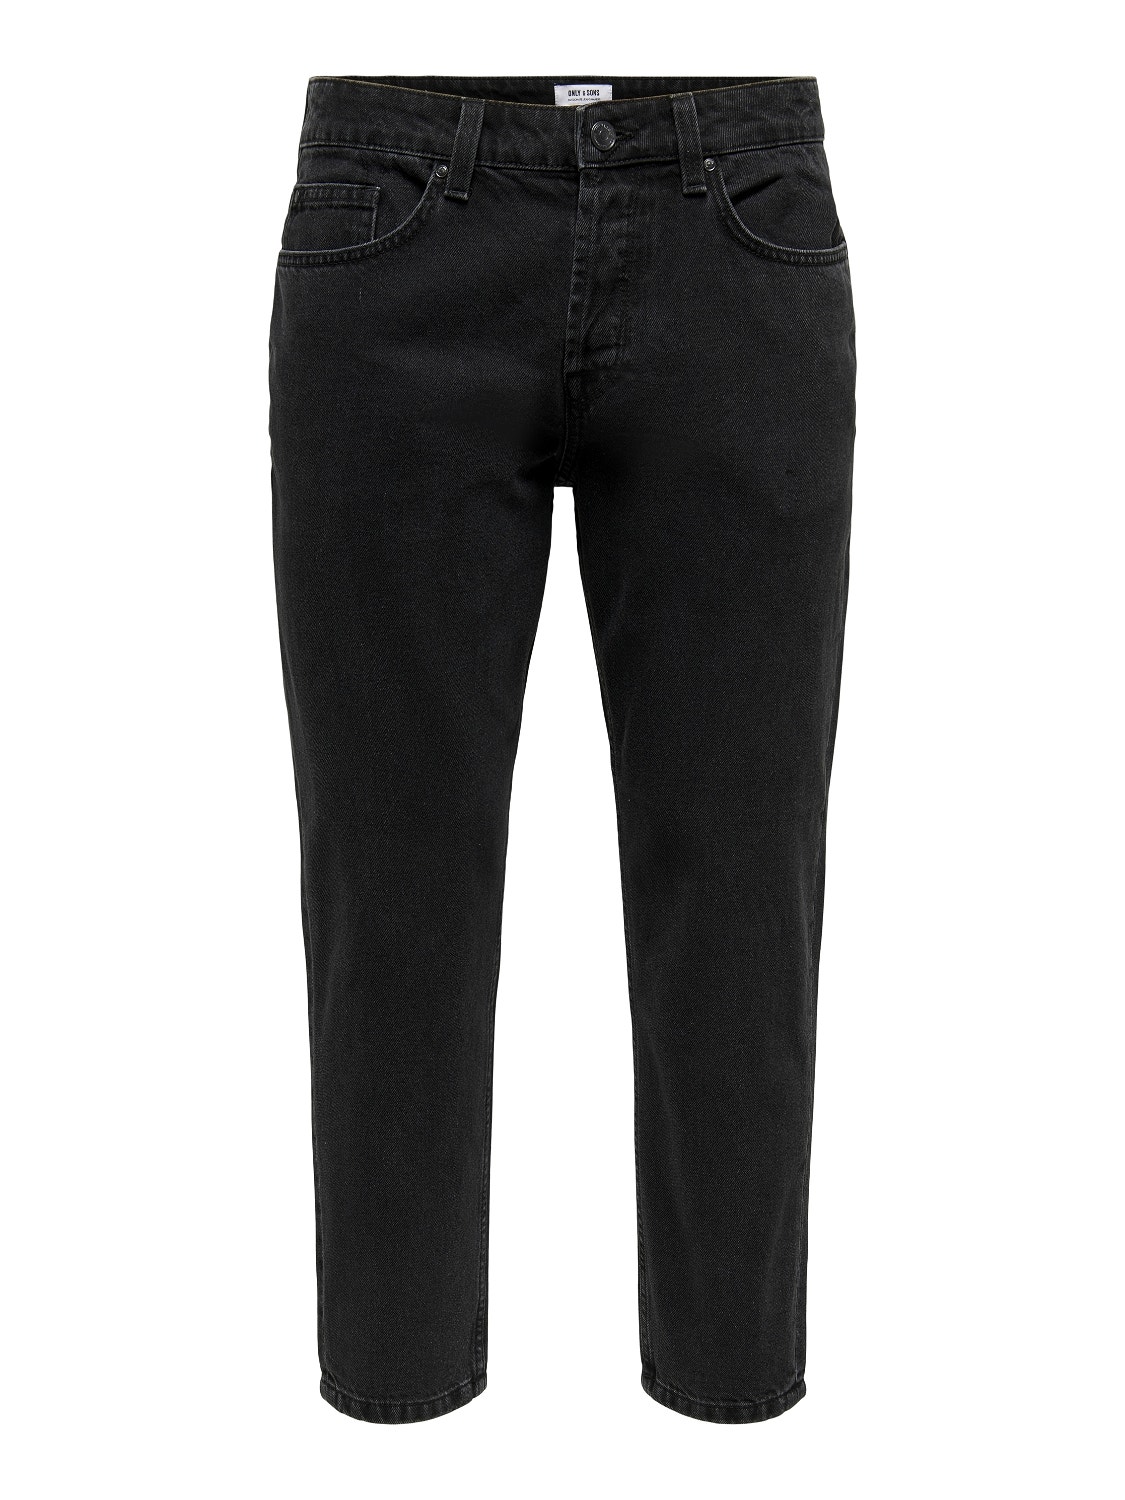 ONLY & SONS Jeans Tapered Fit -Black Denim - 22022962